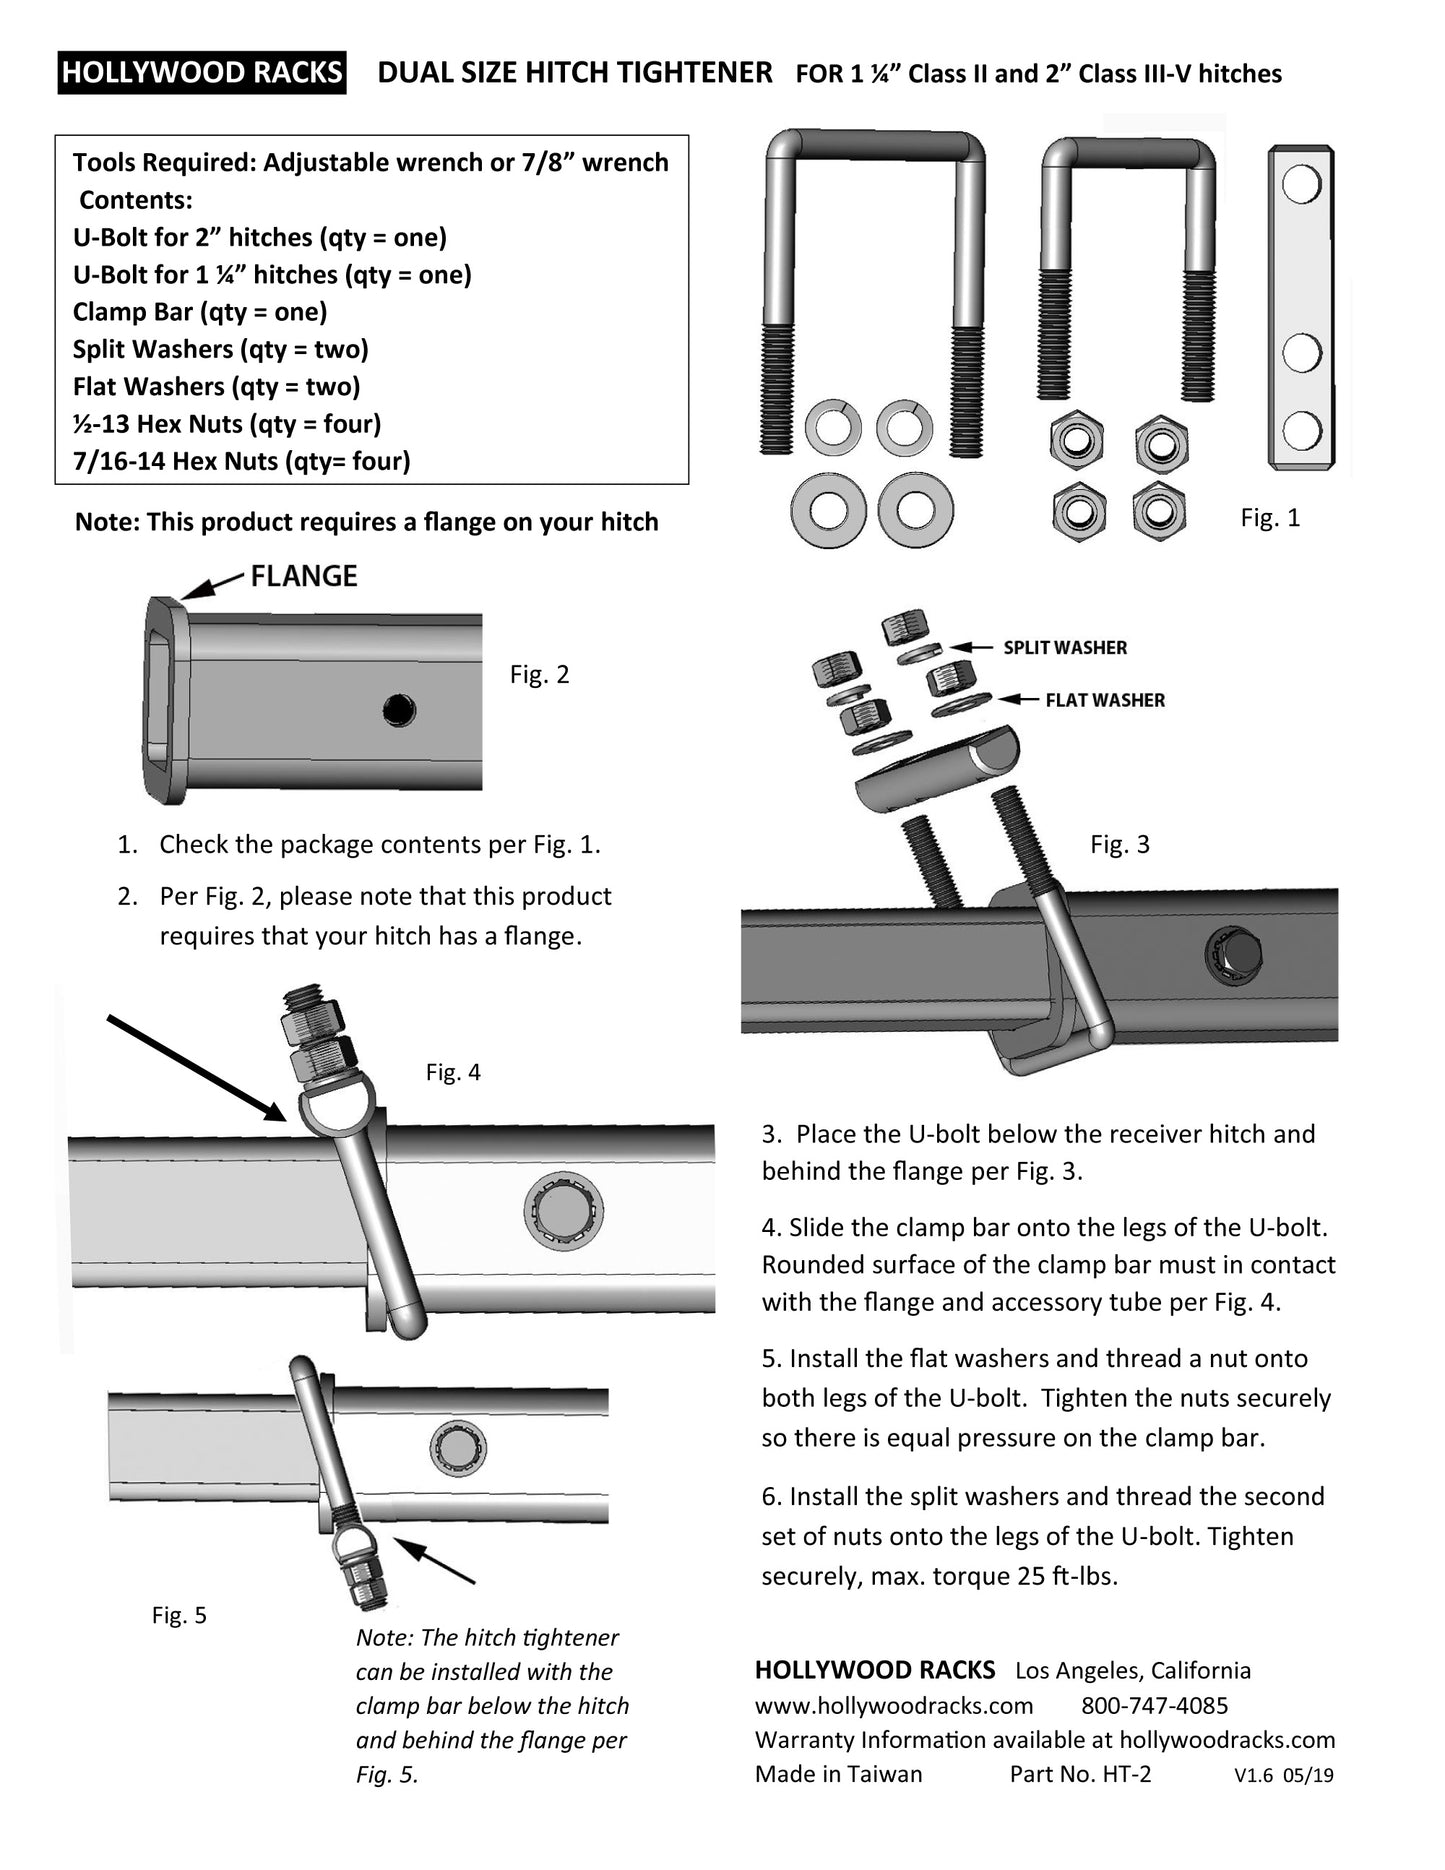 Hollywood Racks vehicle Hitch Tightener Installation Guide